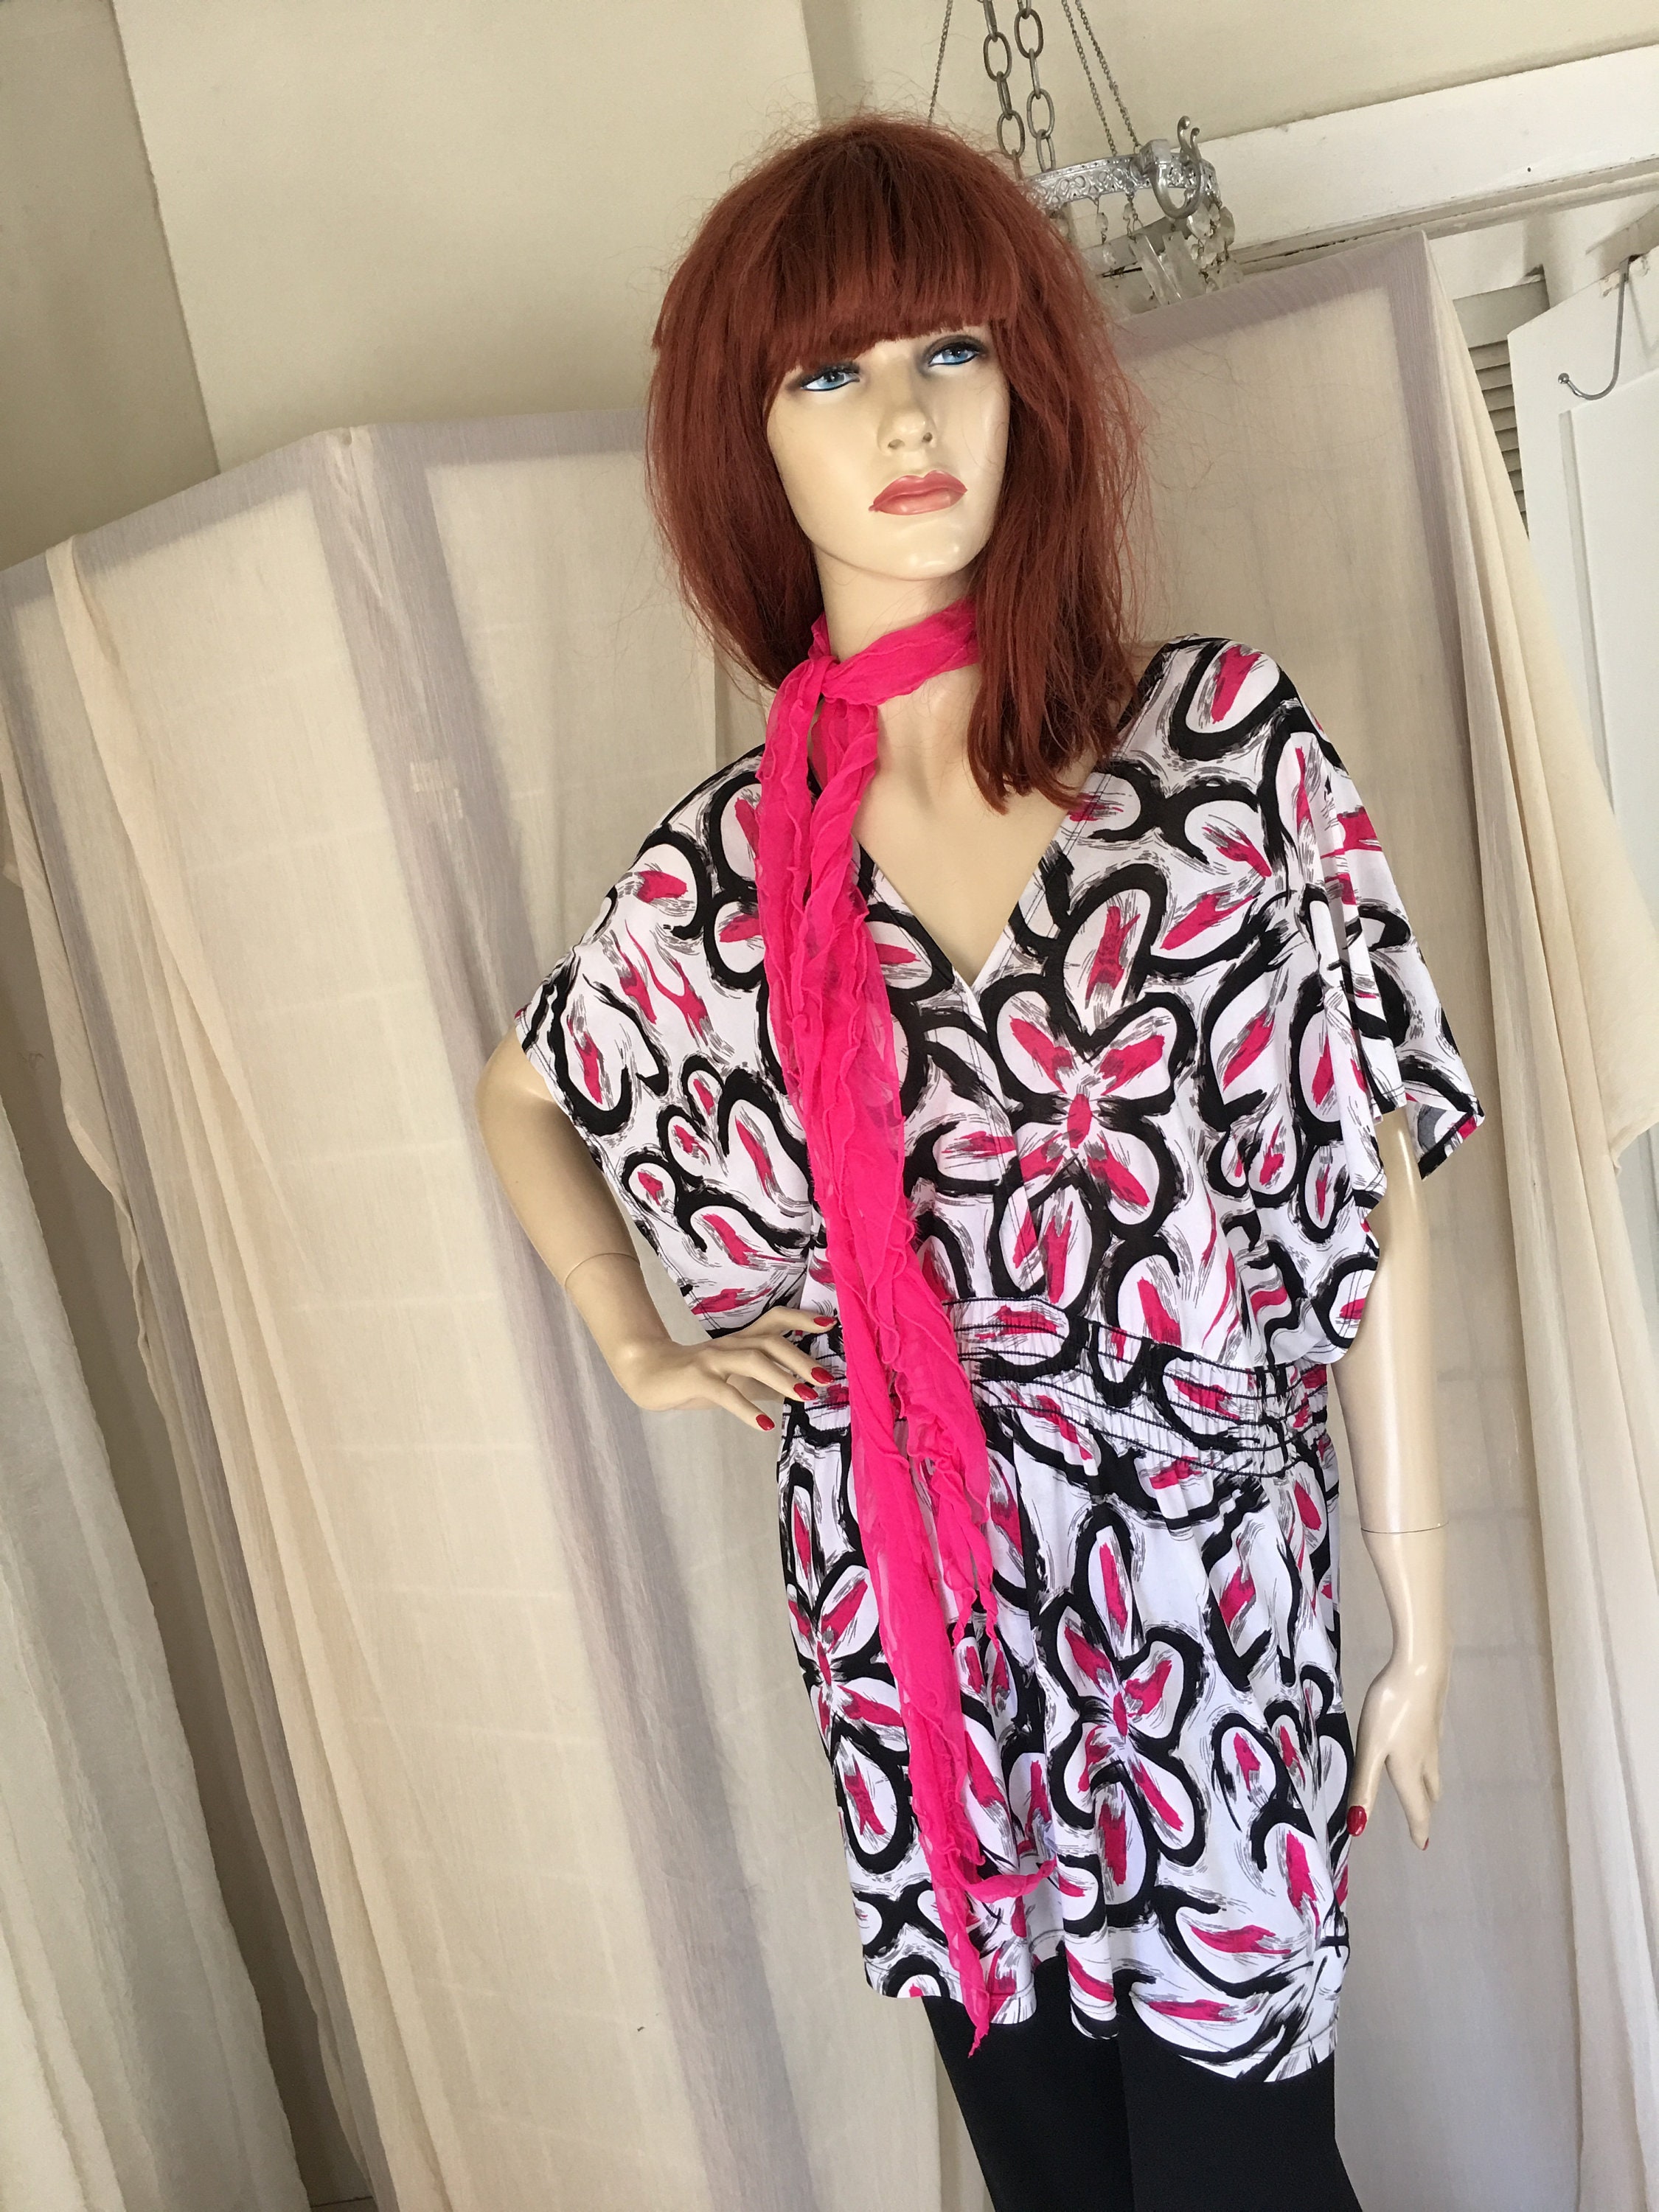 Men’s 1920s Style Ties, Neck Ties & Bowties Vintage 1920S Style Vivid Tunic Top With Hot Pink Chiffon Tie Belt Or Neck One Size Soft Jersey Floral Print Versatile Wear Different Ways $65.00 AT vintagedancer.com